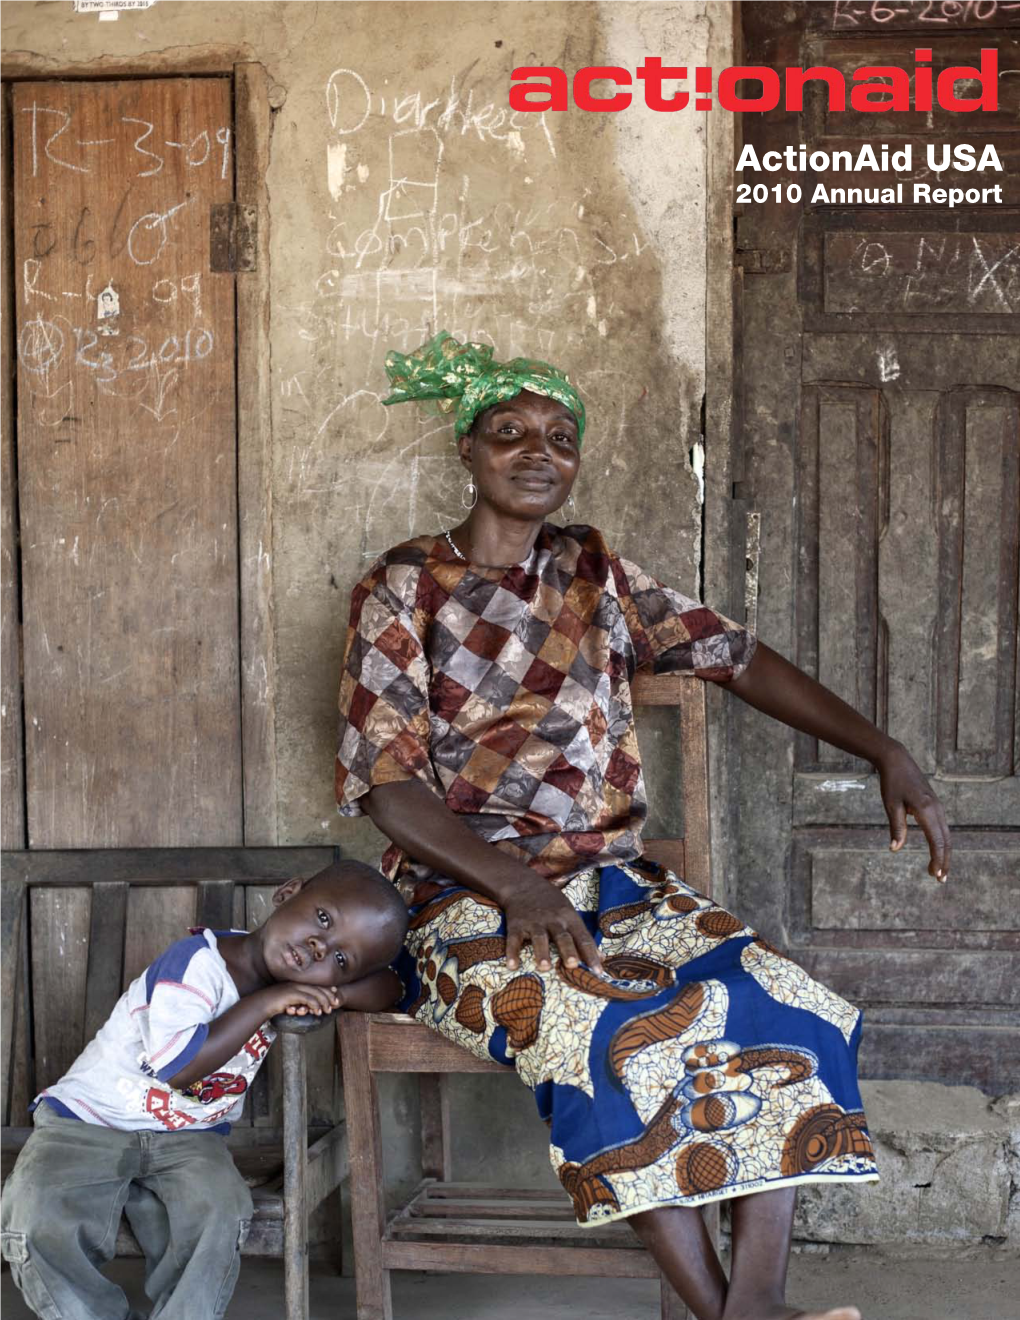 Actionaid USA 2010 Annual Report Message from the Executive Director